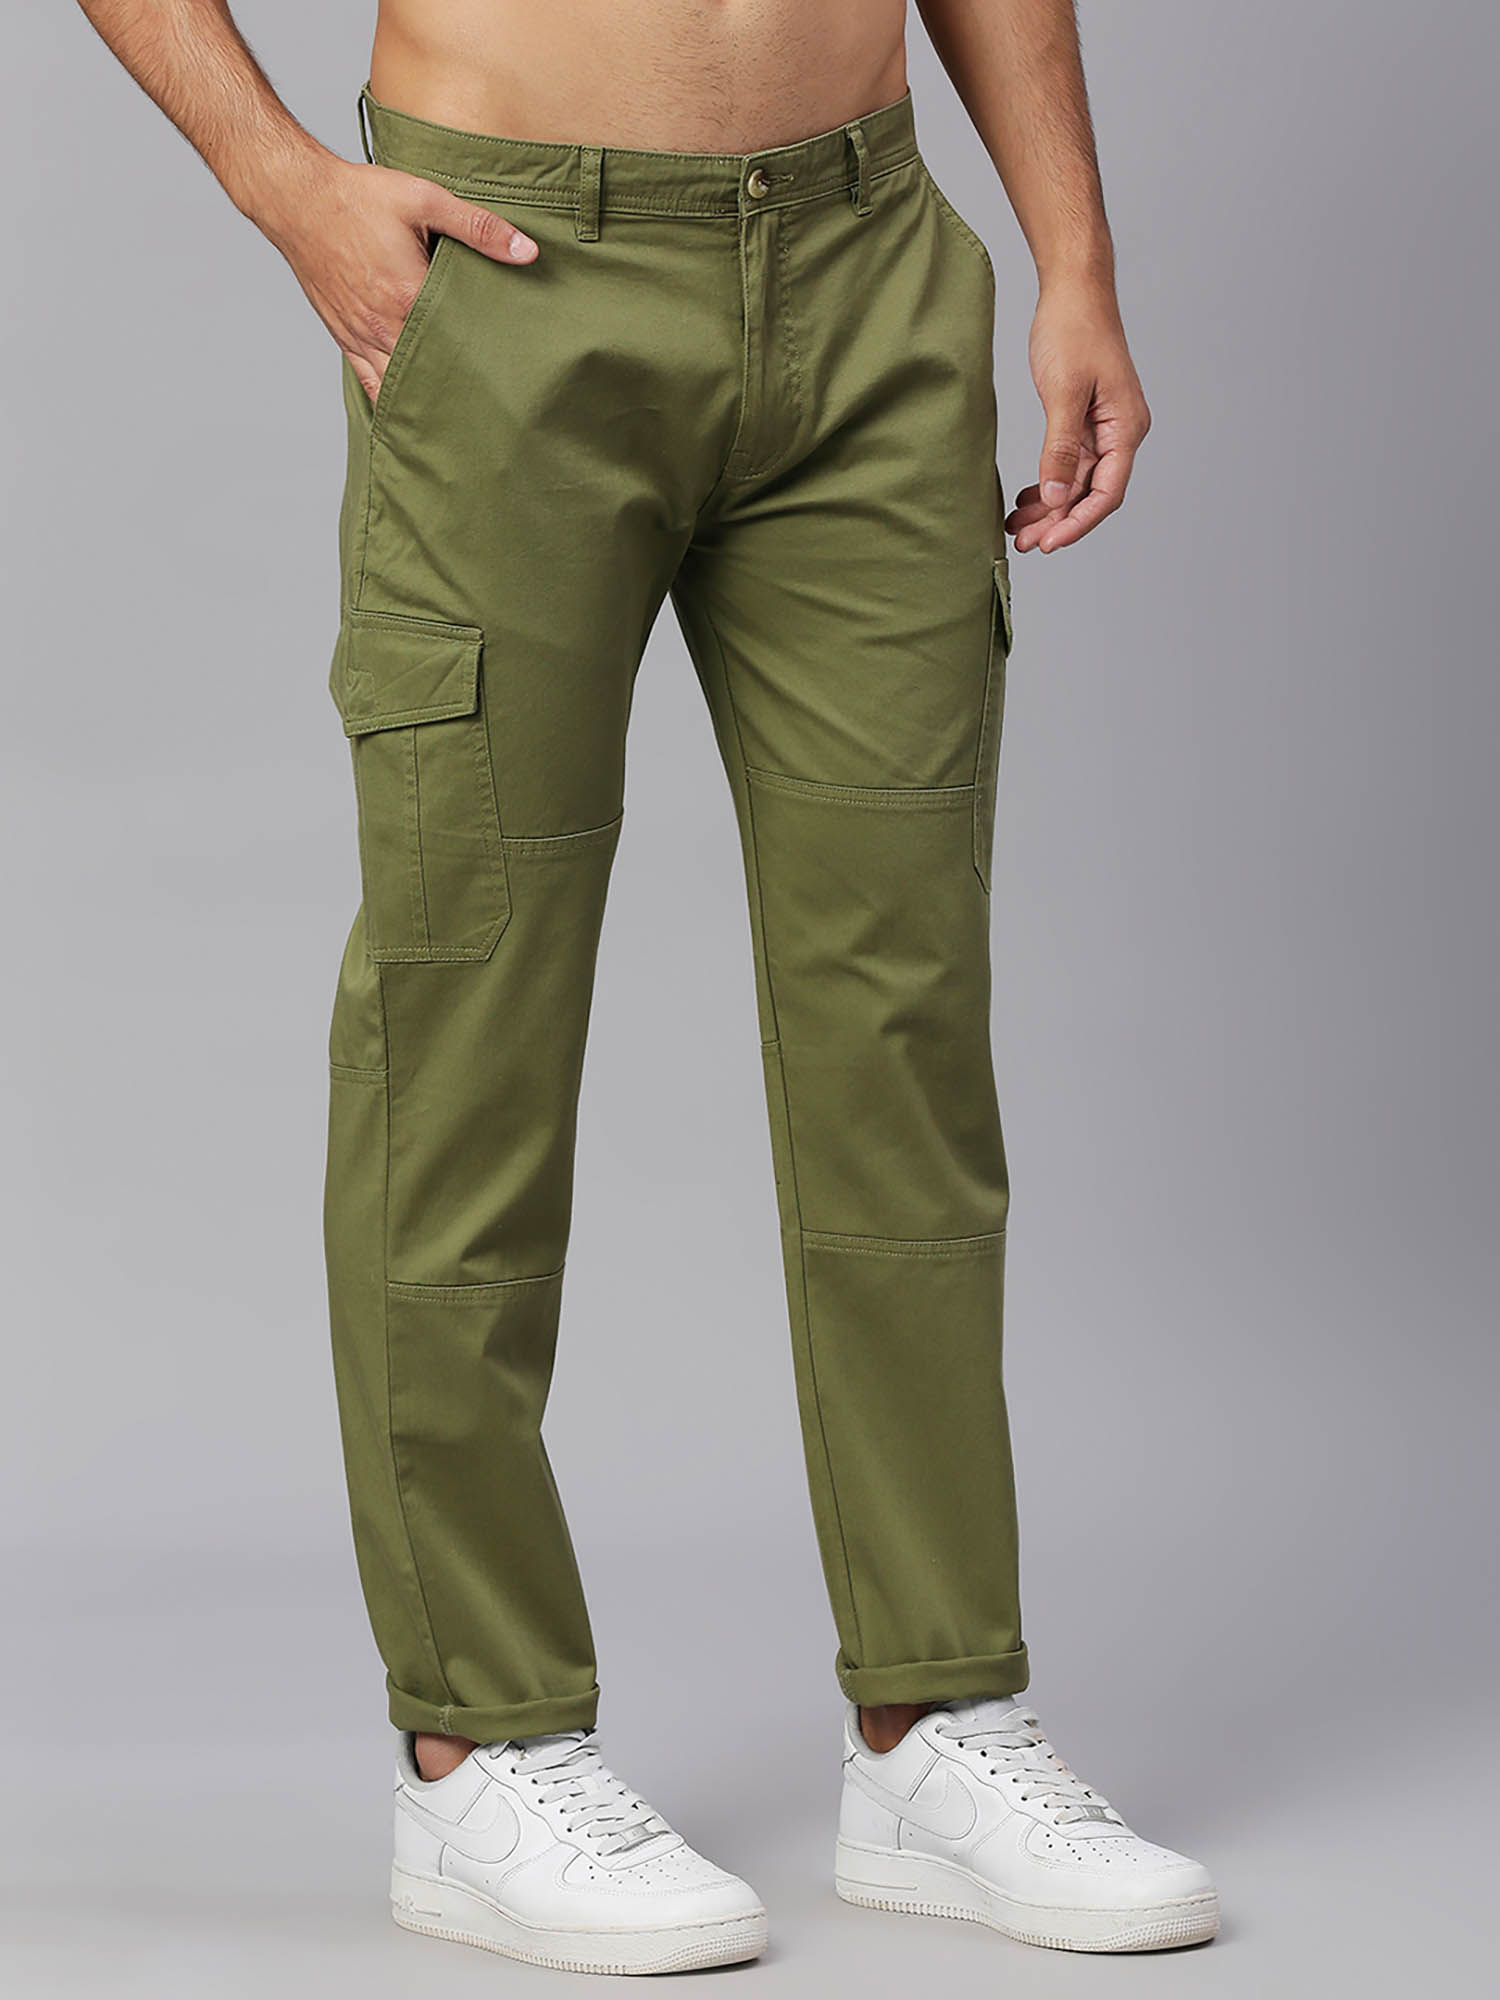 Cargo Trousers for Men UK Sale Clearance,Elasticated Waist Work Trousers  Mens Straight Fit Combat Trousers Casual Smart Trousers Outdoor Trousers  Work Utility & Safety Trousers Cargo Pants : Amazon.co.uk: Fashion